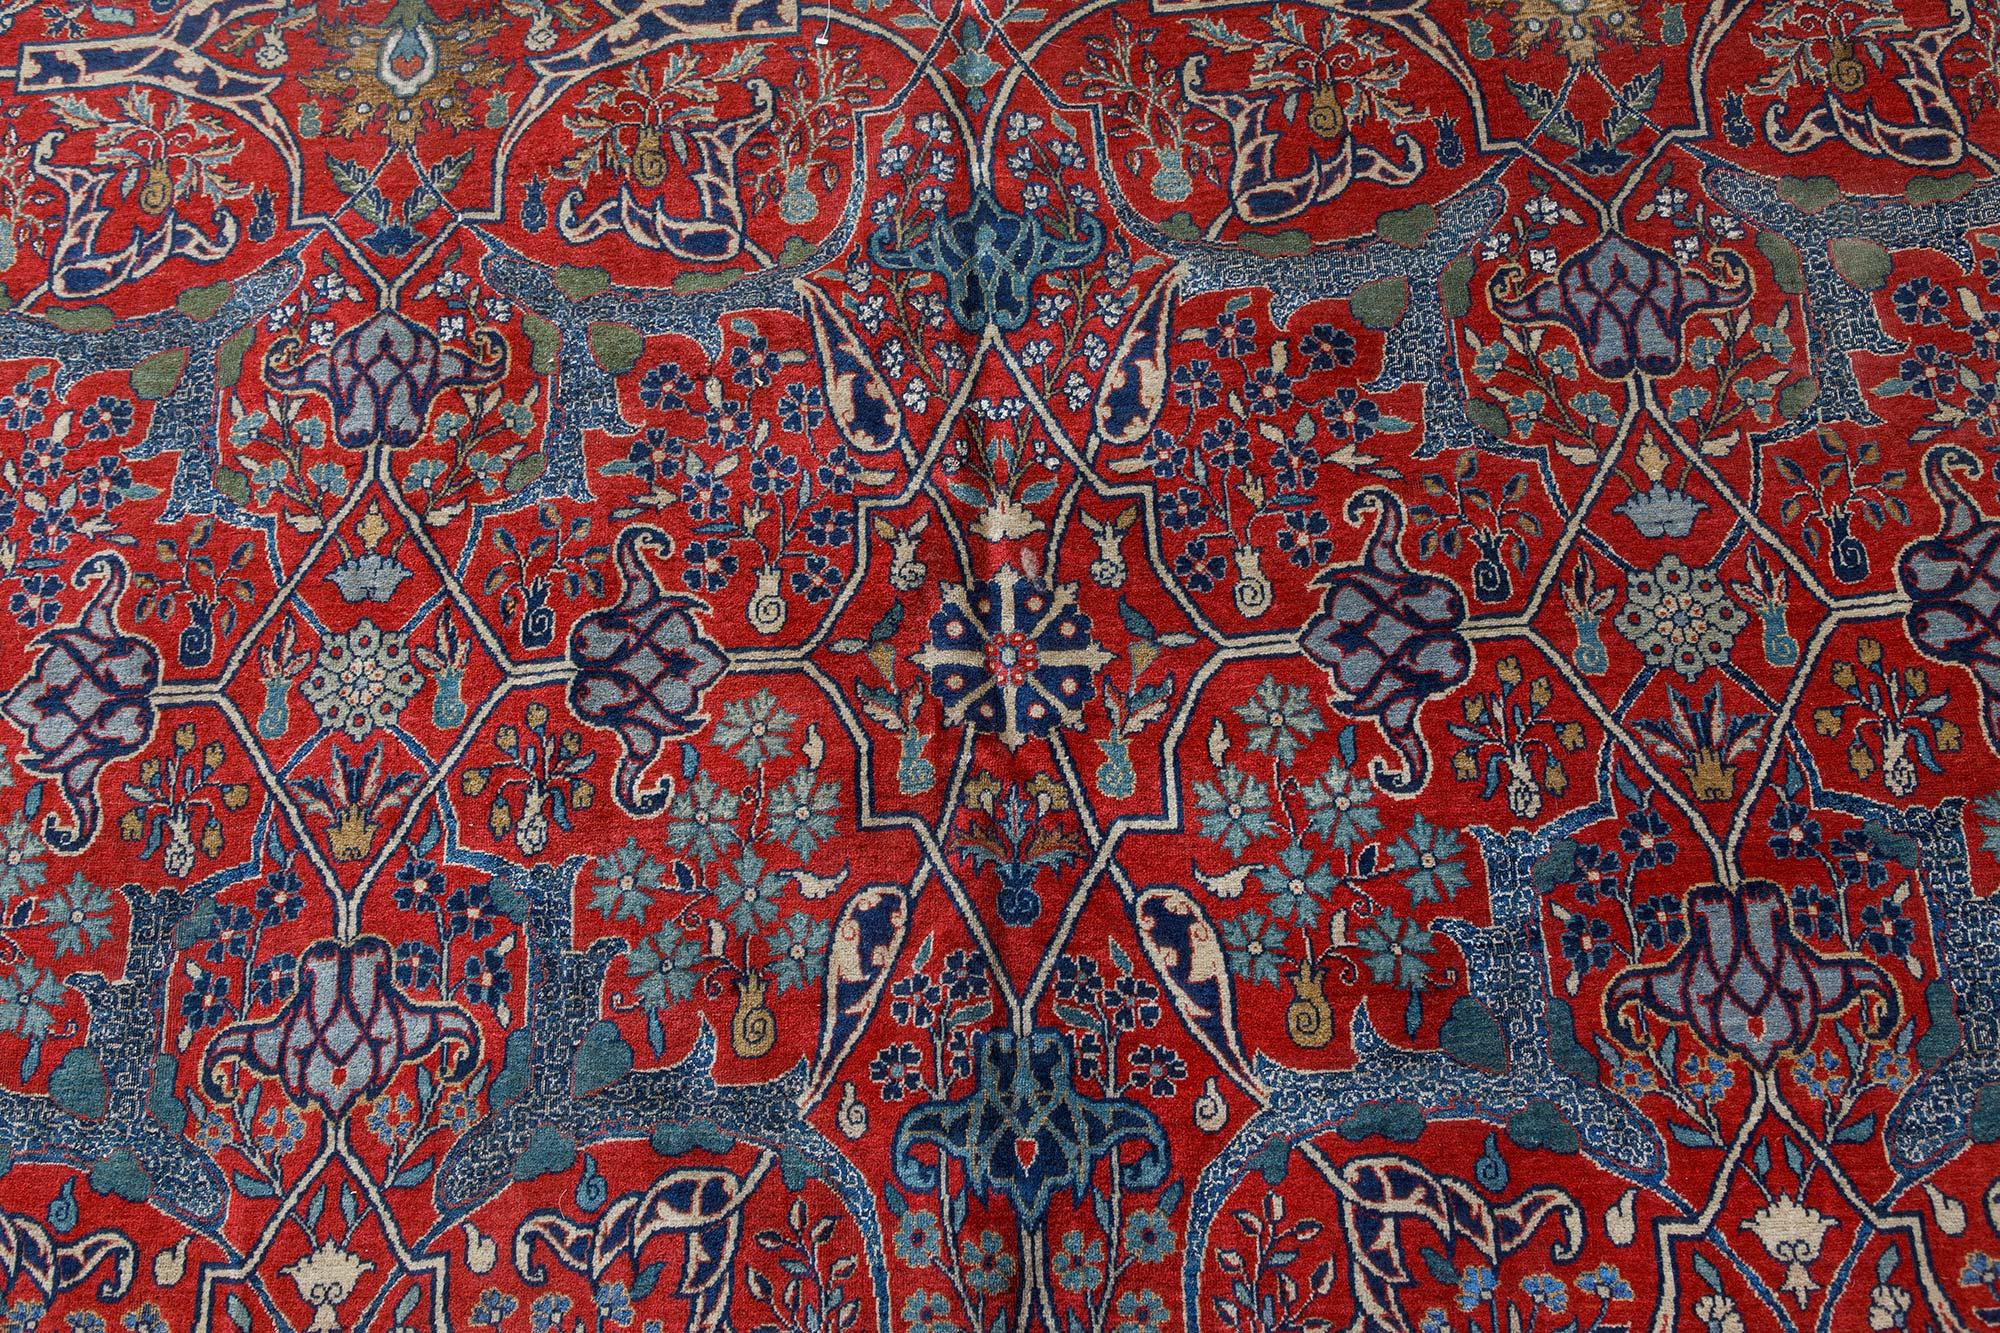 One-of-a-kind antique Persian Tehran botanic red, blue handmade wool rug 
Size: 7'8